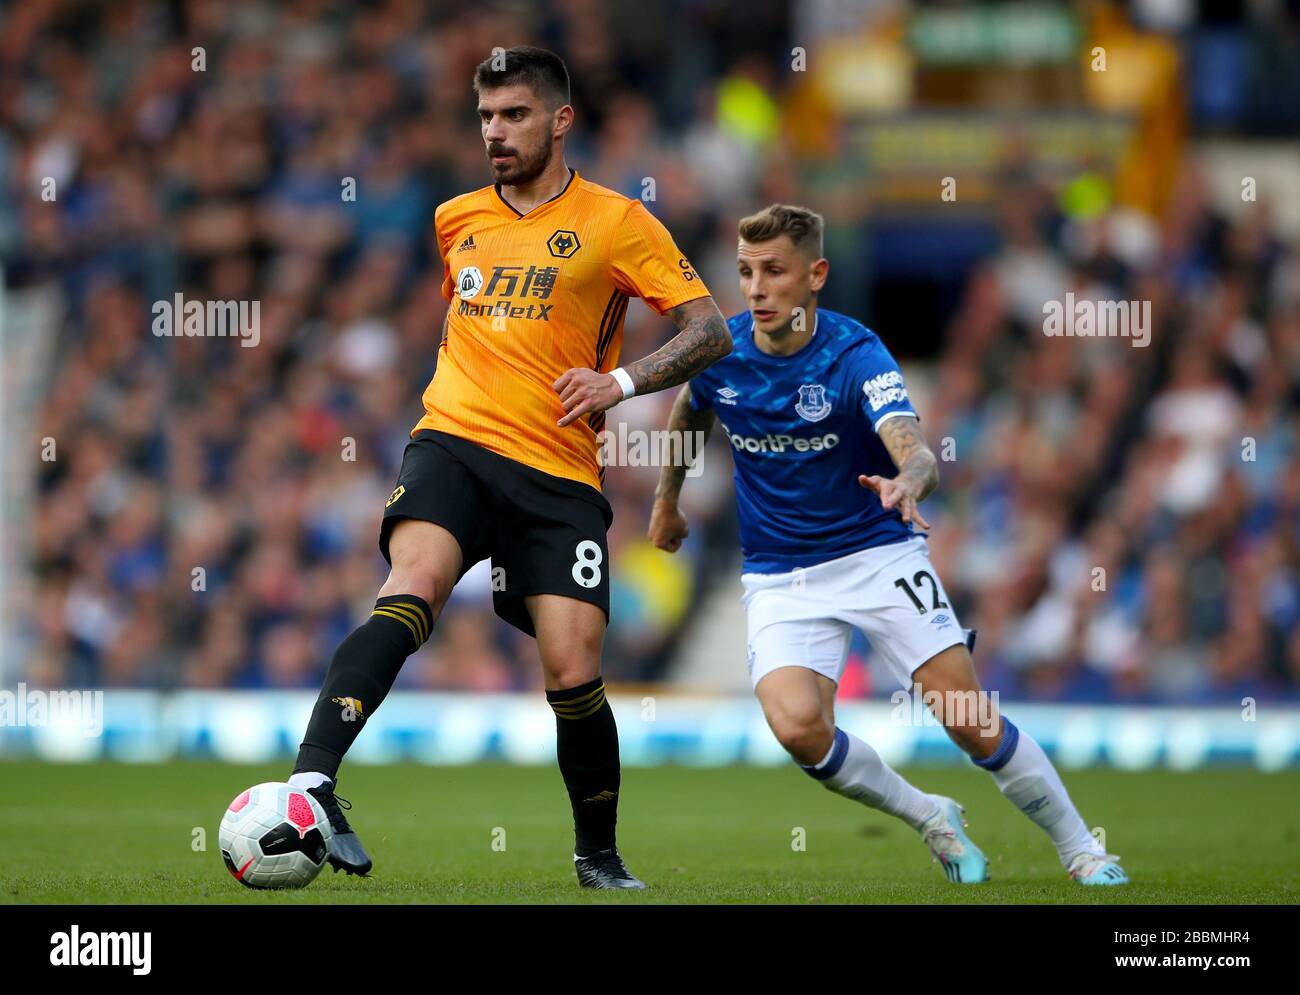 Wolverhampton Wanderers's Ruben Neves holds off challenge from Everton's Lucas Digne Stock Photo